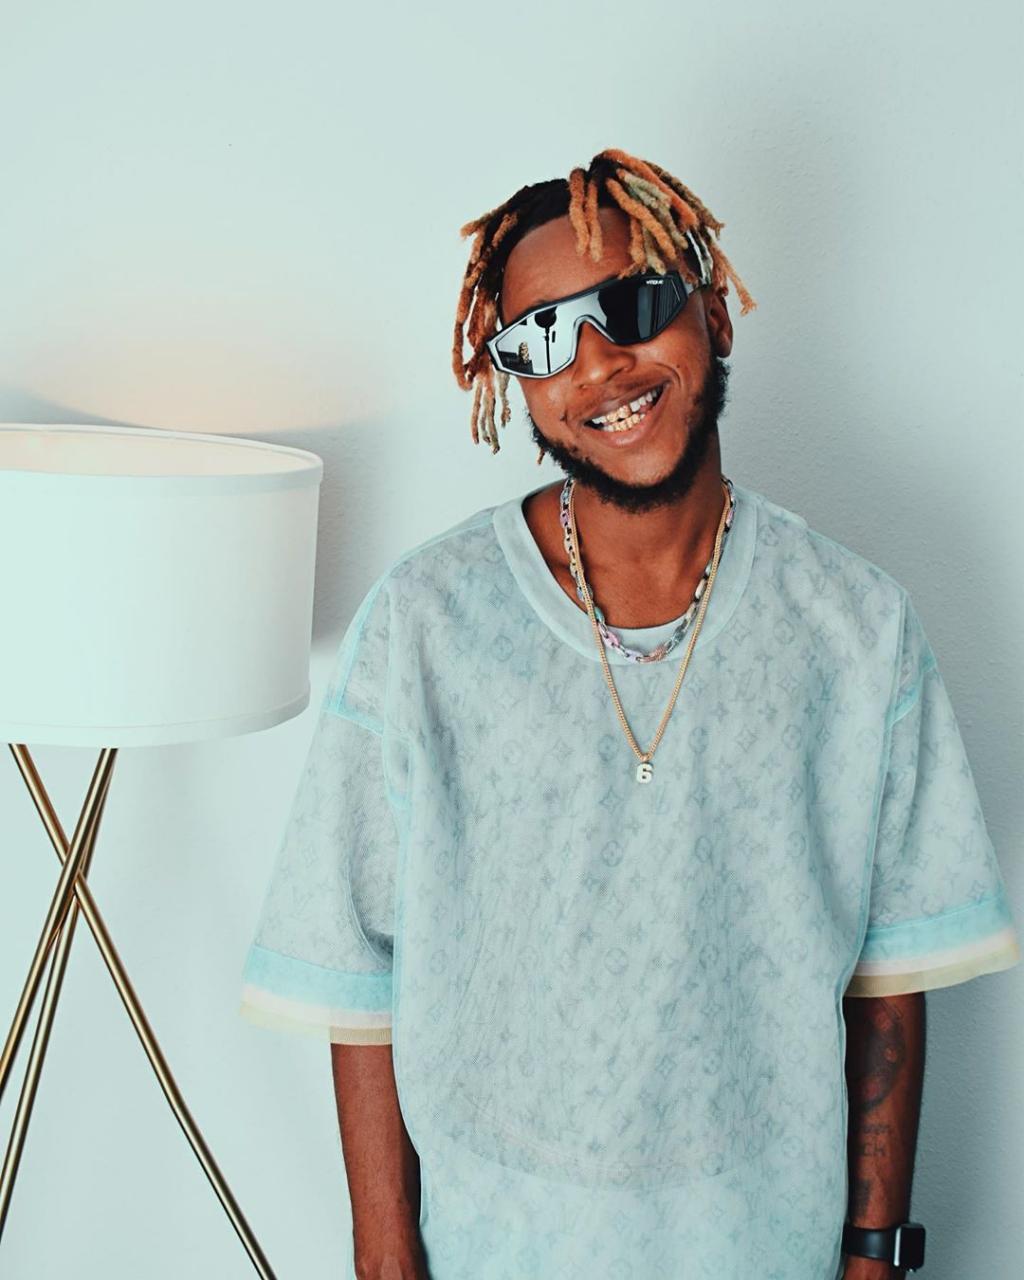 $2m is now N1 billion. There will be many young billionaires in Nigeria from 2022 onward - Rapper Yung6ix